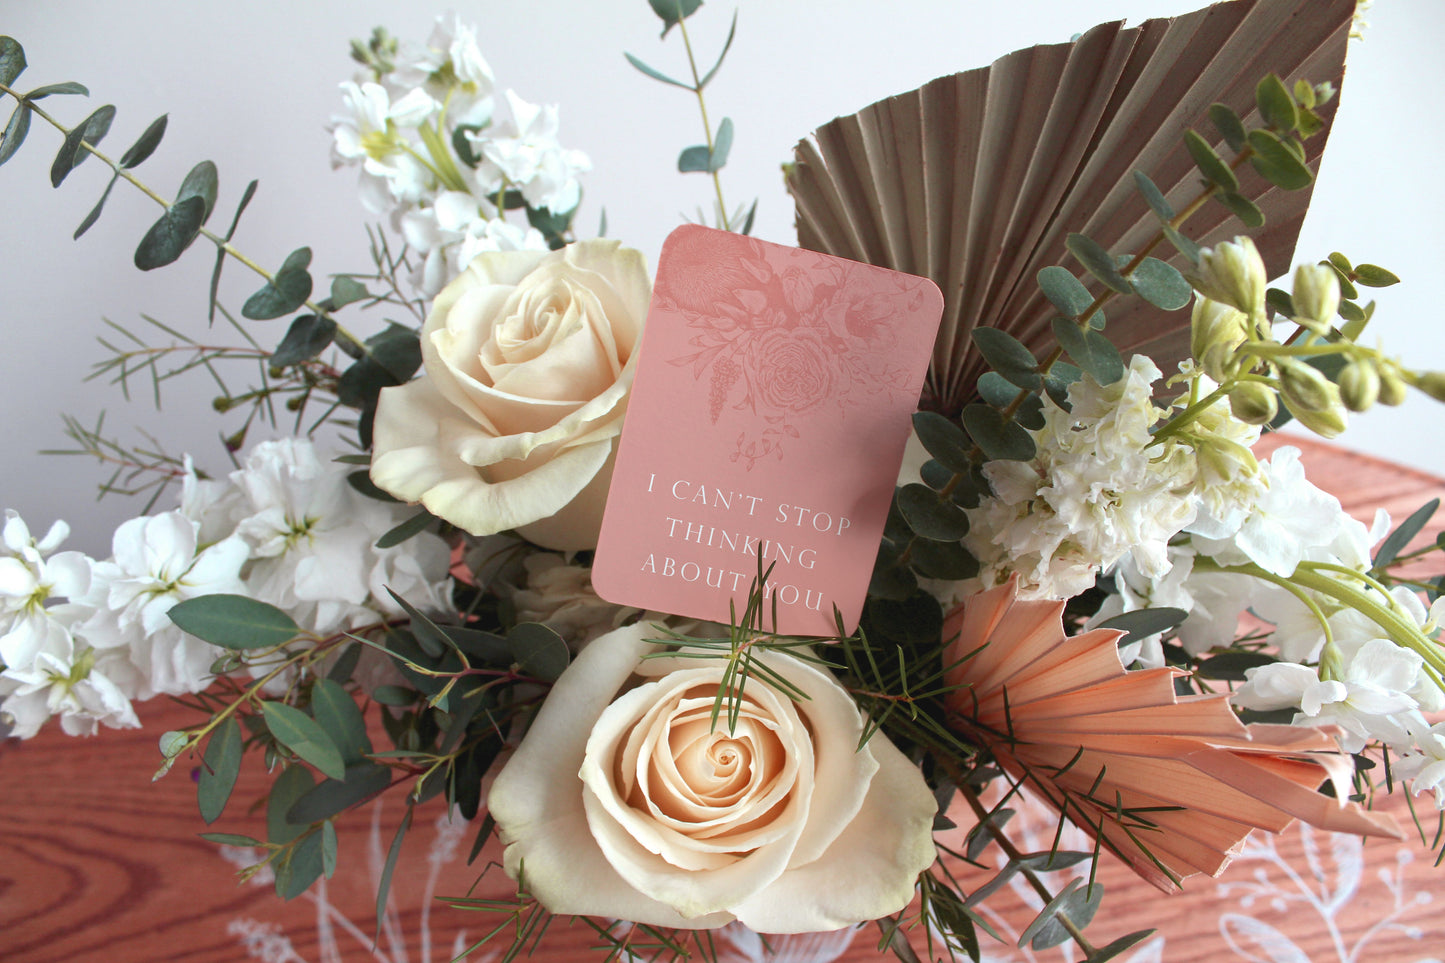 A style shot of "I can't stop thinking about you" minicard in a bouquet of flowers